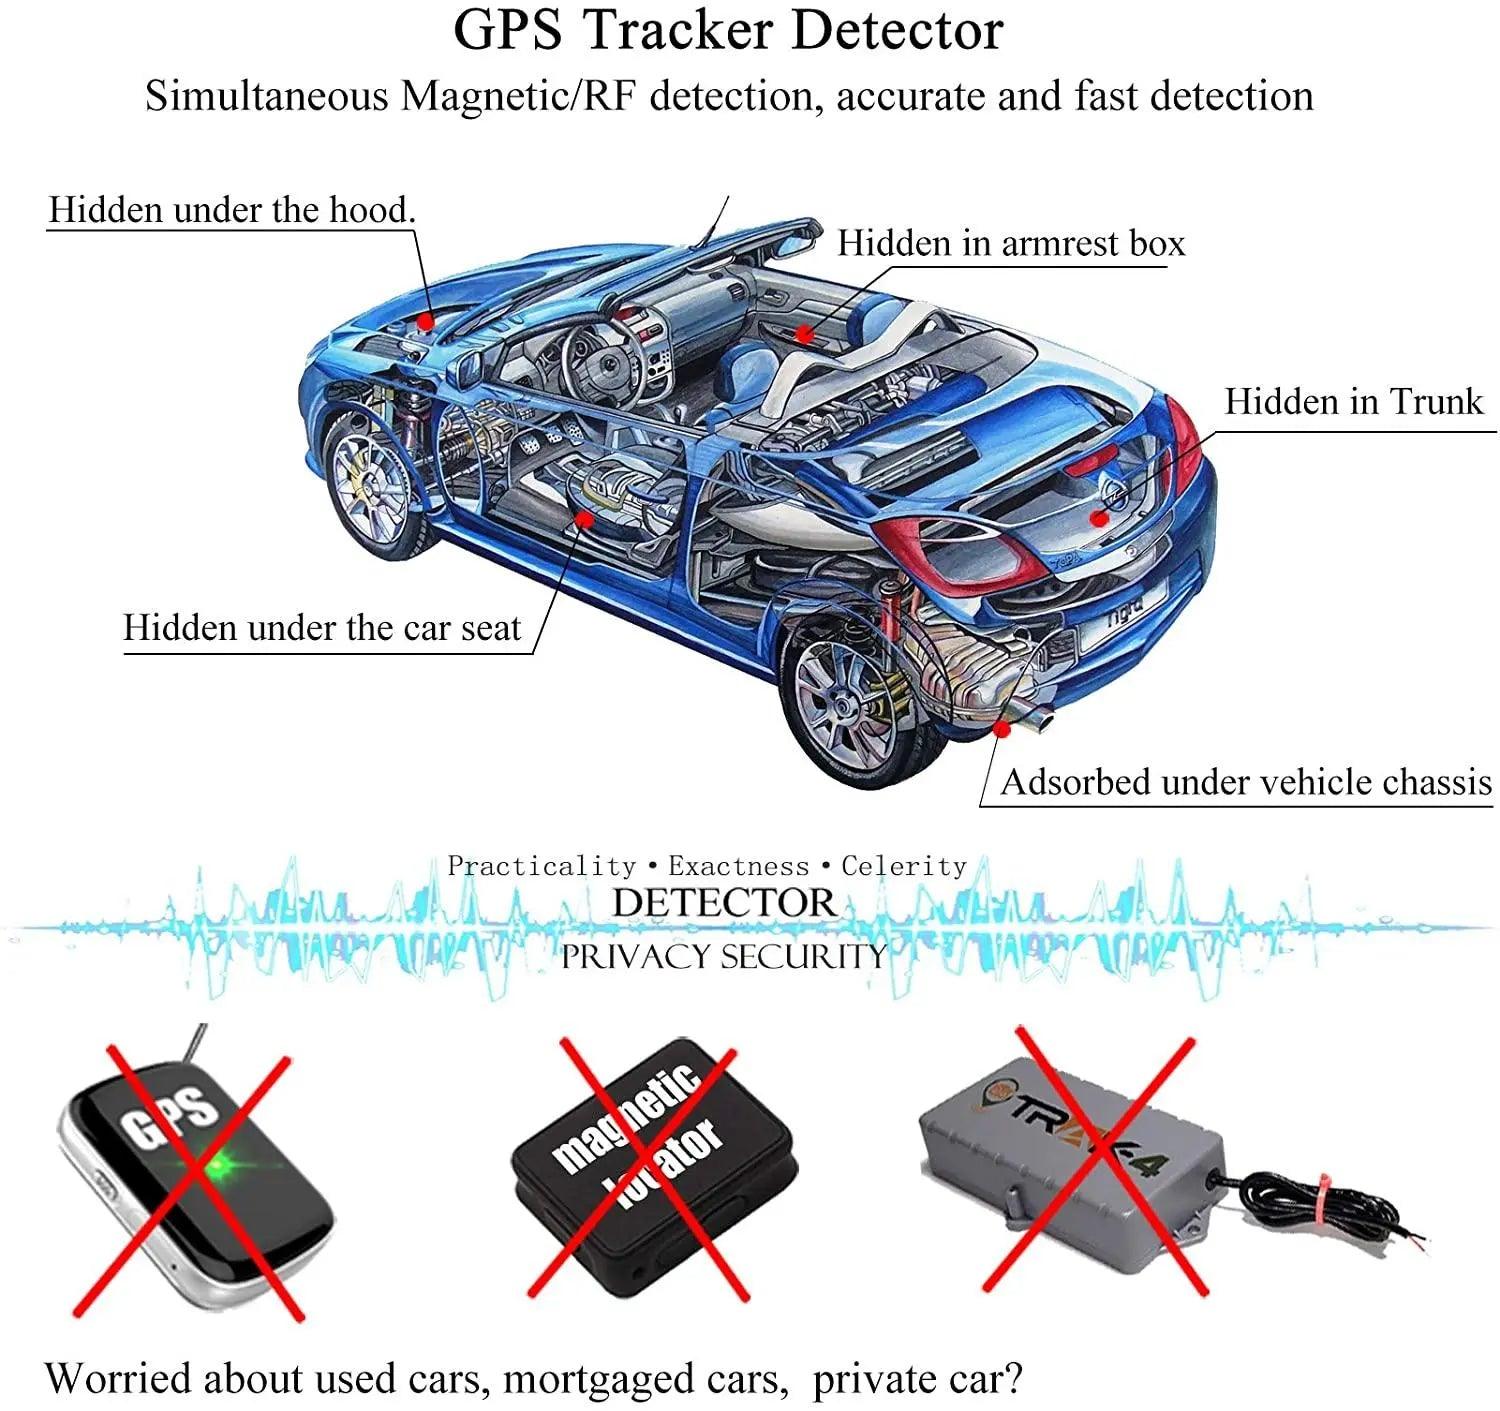 Anti-Spy Bug Detector with Hidden Camera, Laser Lens, GSM Listening Device, and RF Signal Detection - Swayfer Tech